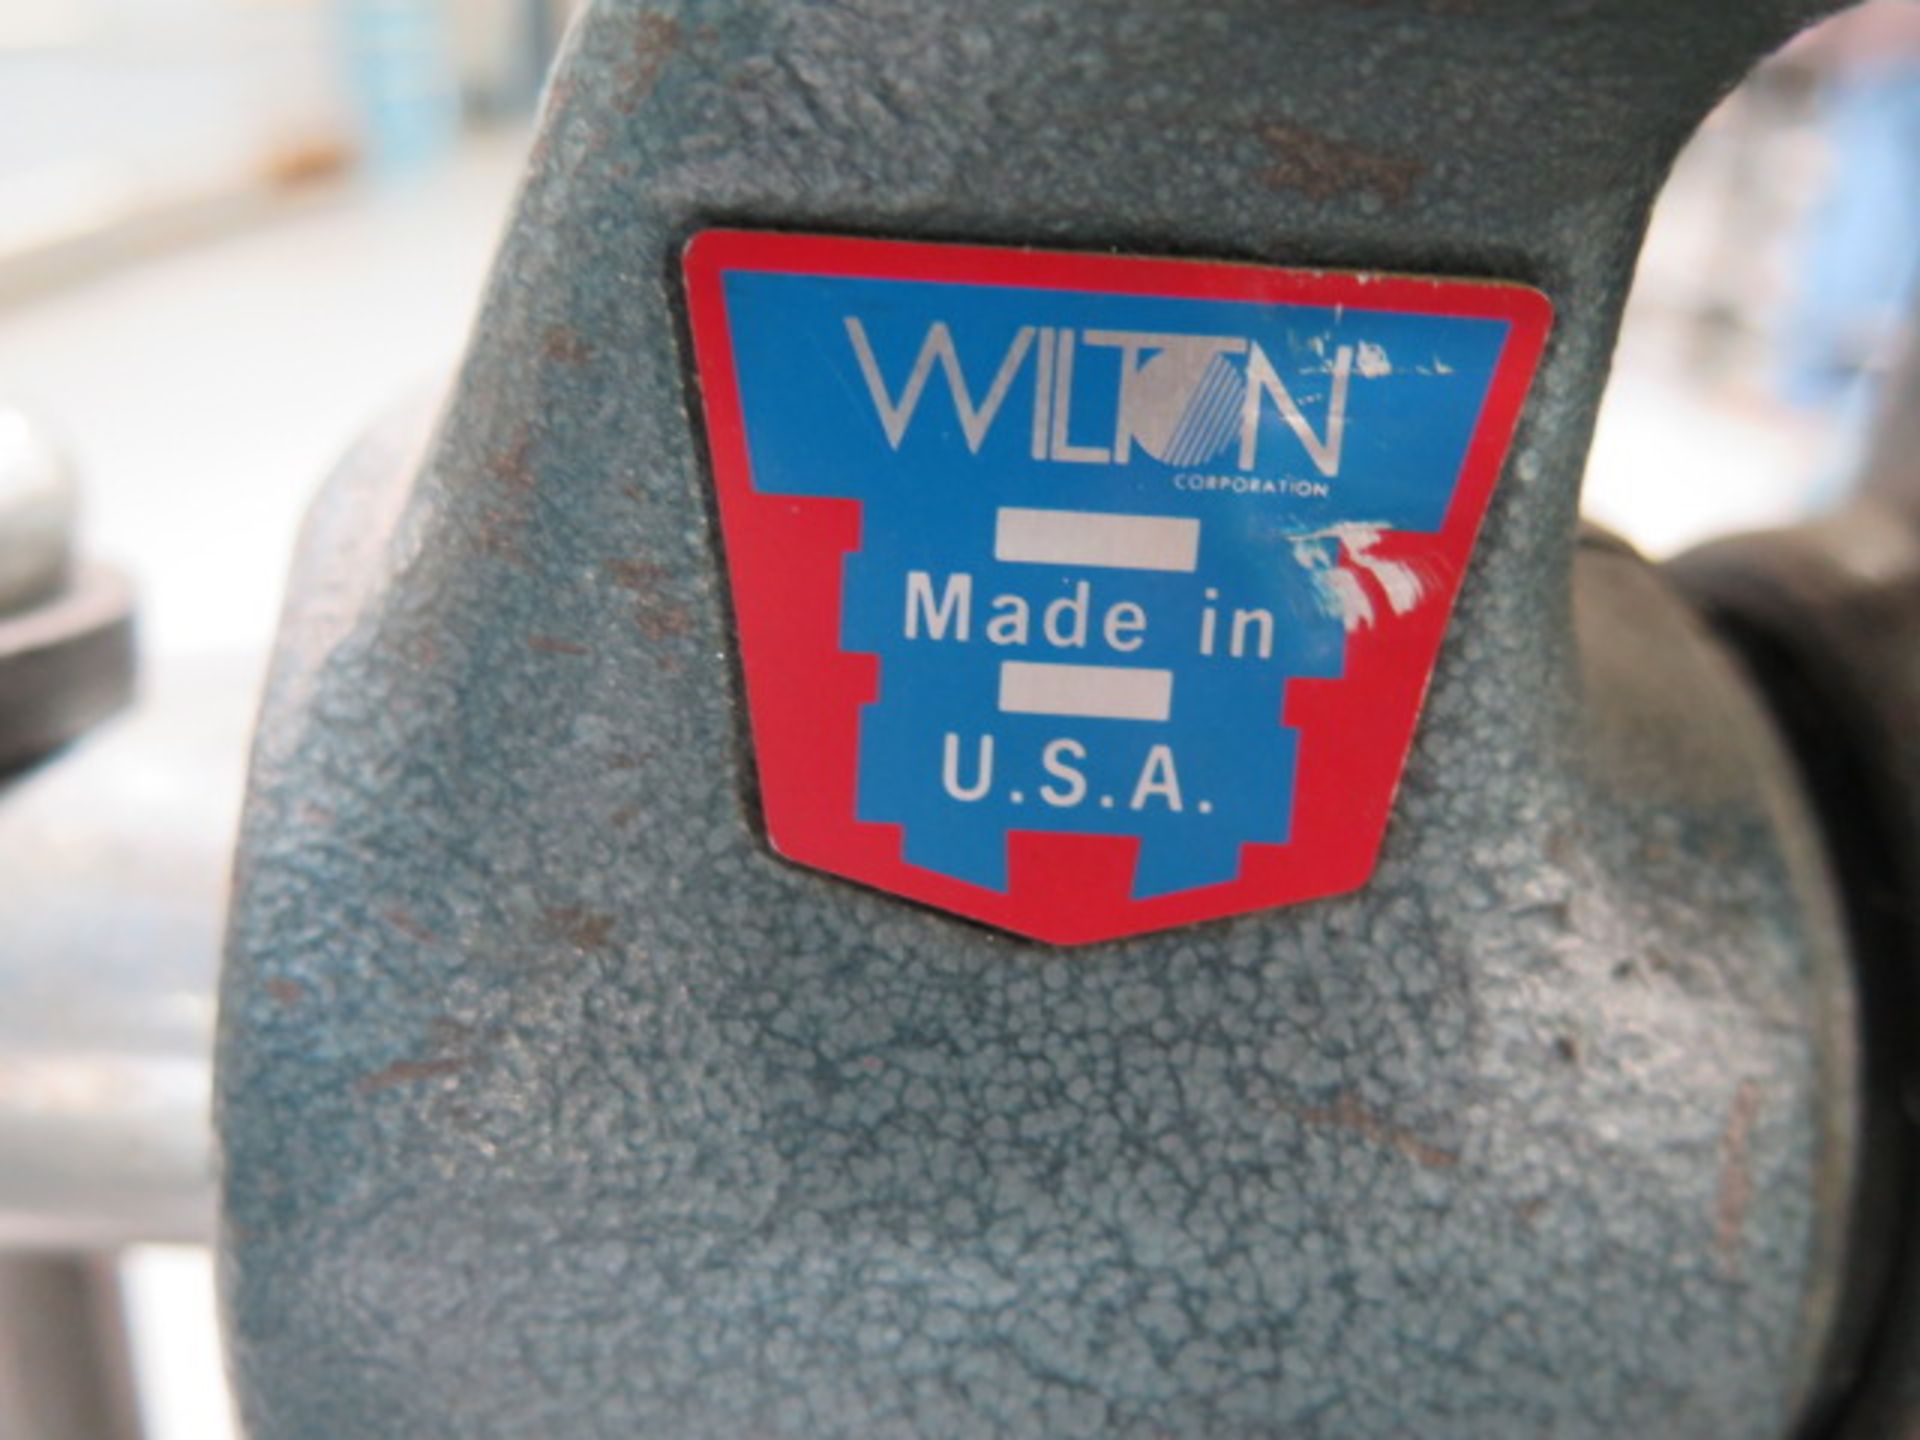 Wilton mdl. 400 4" Bench Vise (SOLD AS-IS - NO WARRANTY) - Image 6 of 6